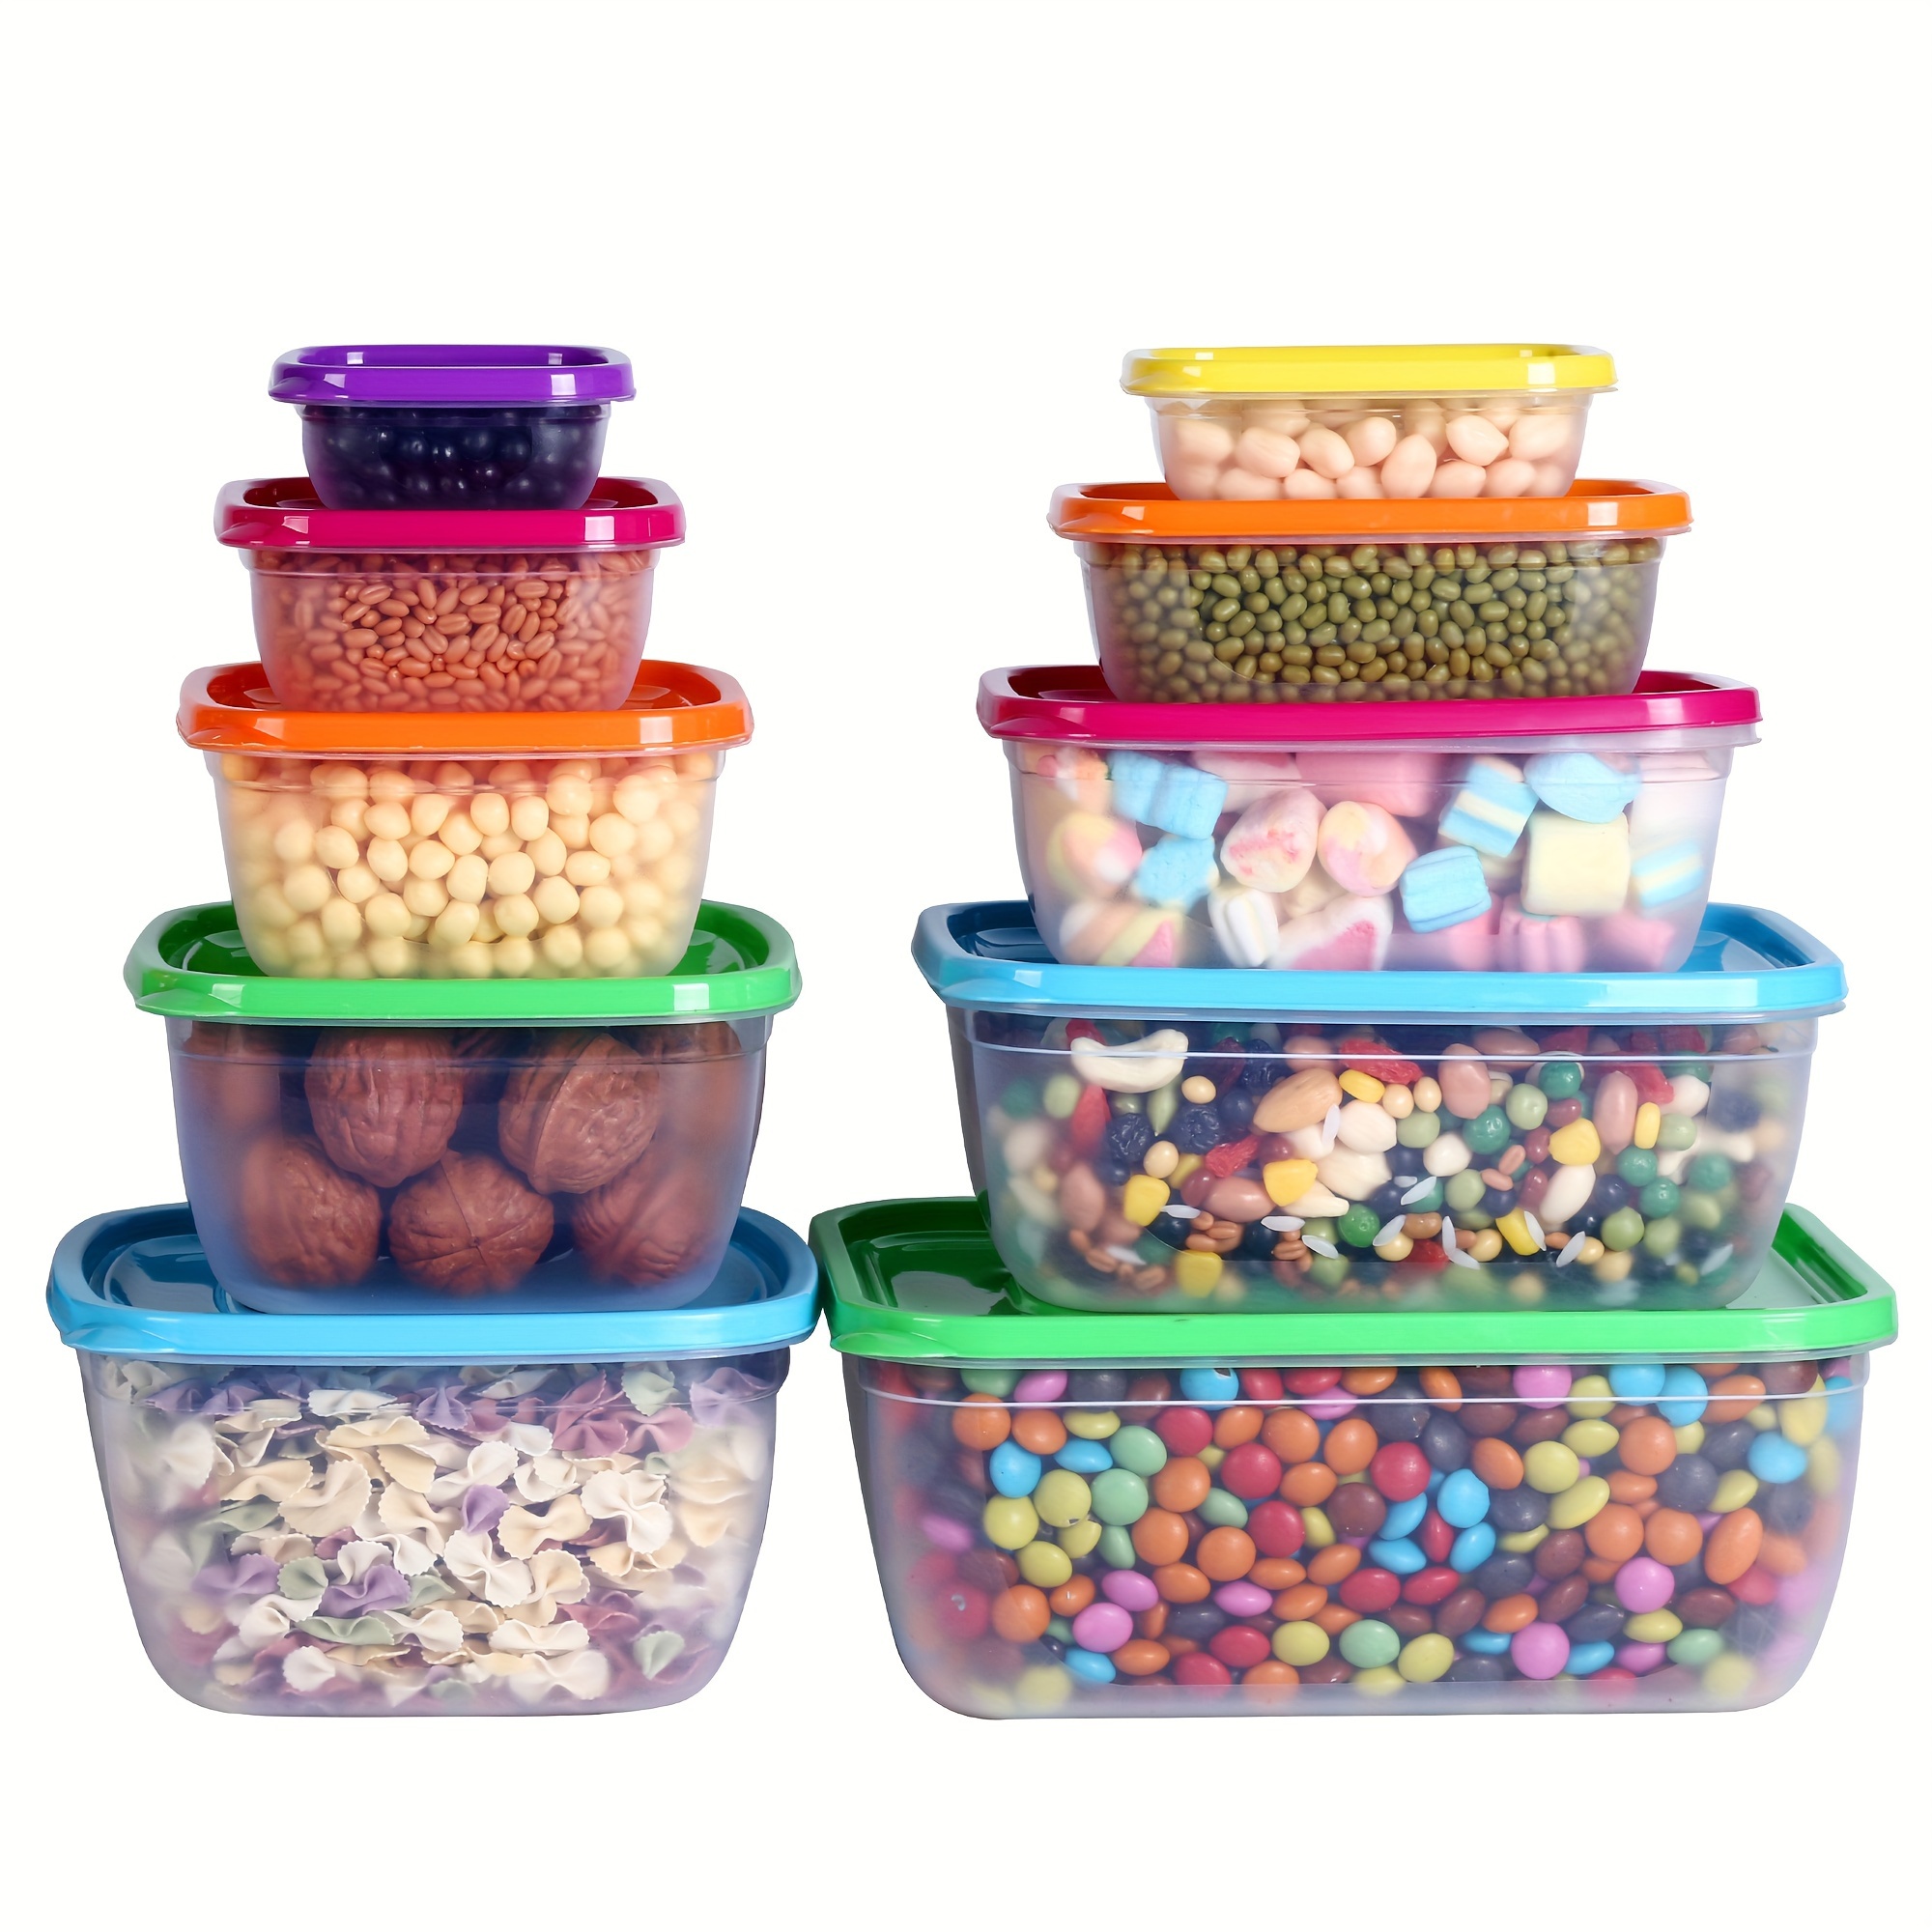  PEDECO 5PCS Rectangle Plastic Portion Box Sets with Lids.Food  Storage Box,Container Sets,Food Storage,Food Containers,Plastic Food  Container,use for School,Work and Travel,950ML Per Box.: Home & Kitchen